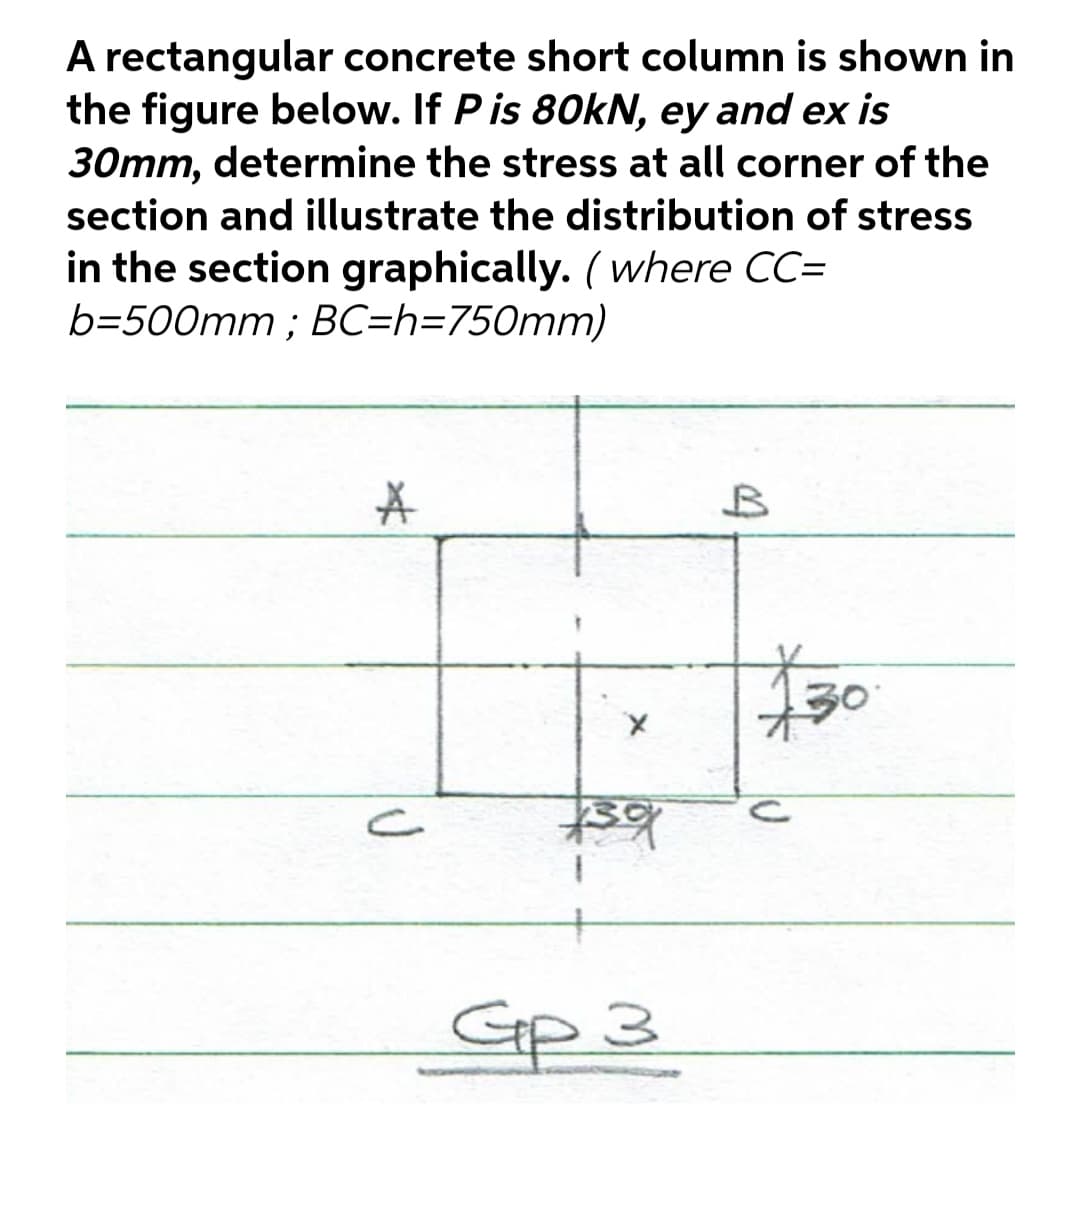 A rectangular concrete short column is shown in
the figure below. If Pis 80kN, ey and ex is
30mm, determine the stress at all corner of the
section and illustrate the distribution of stress
in the section graphically. ( where CC=
b=500mm ; BC=h=750mm)
bst
Gp 3
